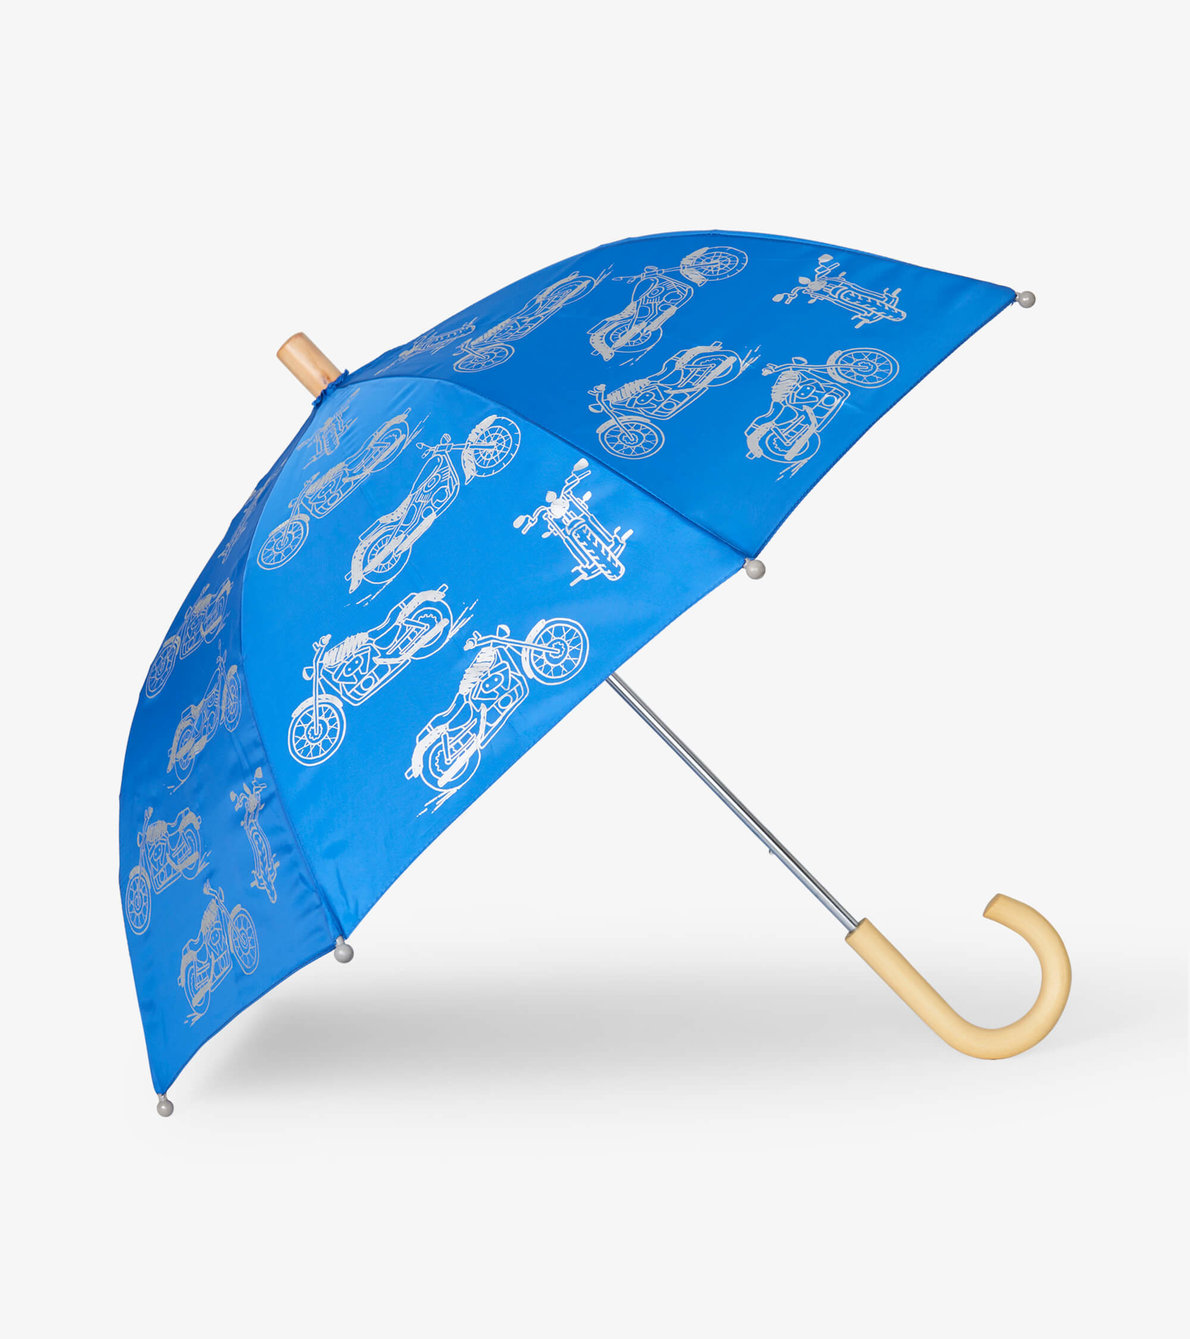 View larger image of Motorcycles Umbrella